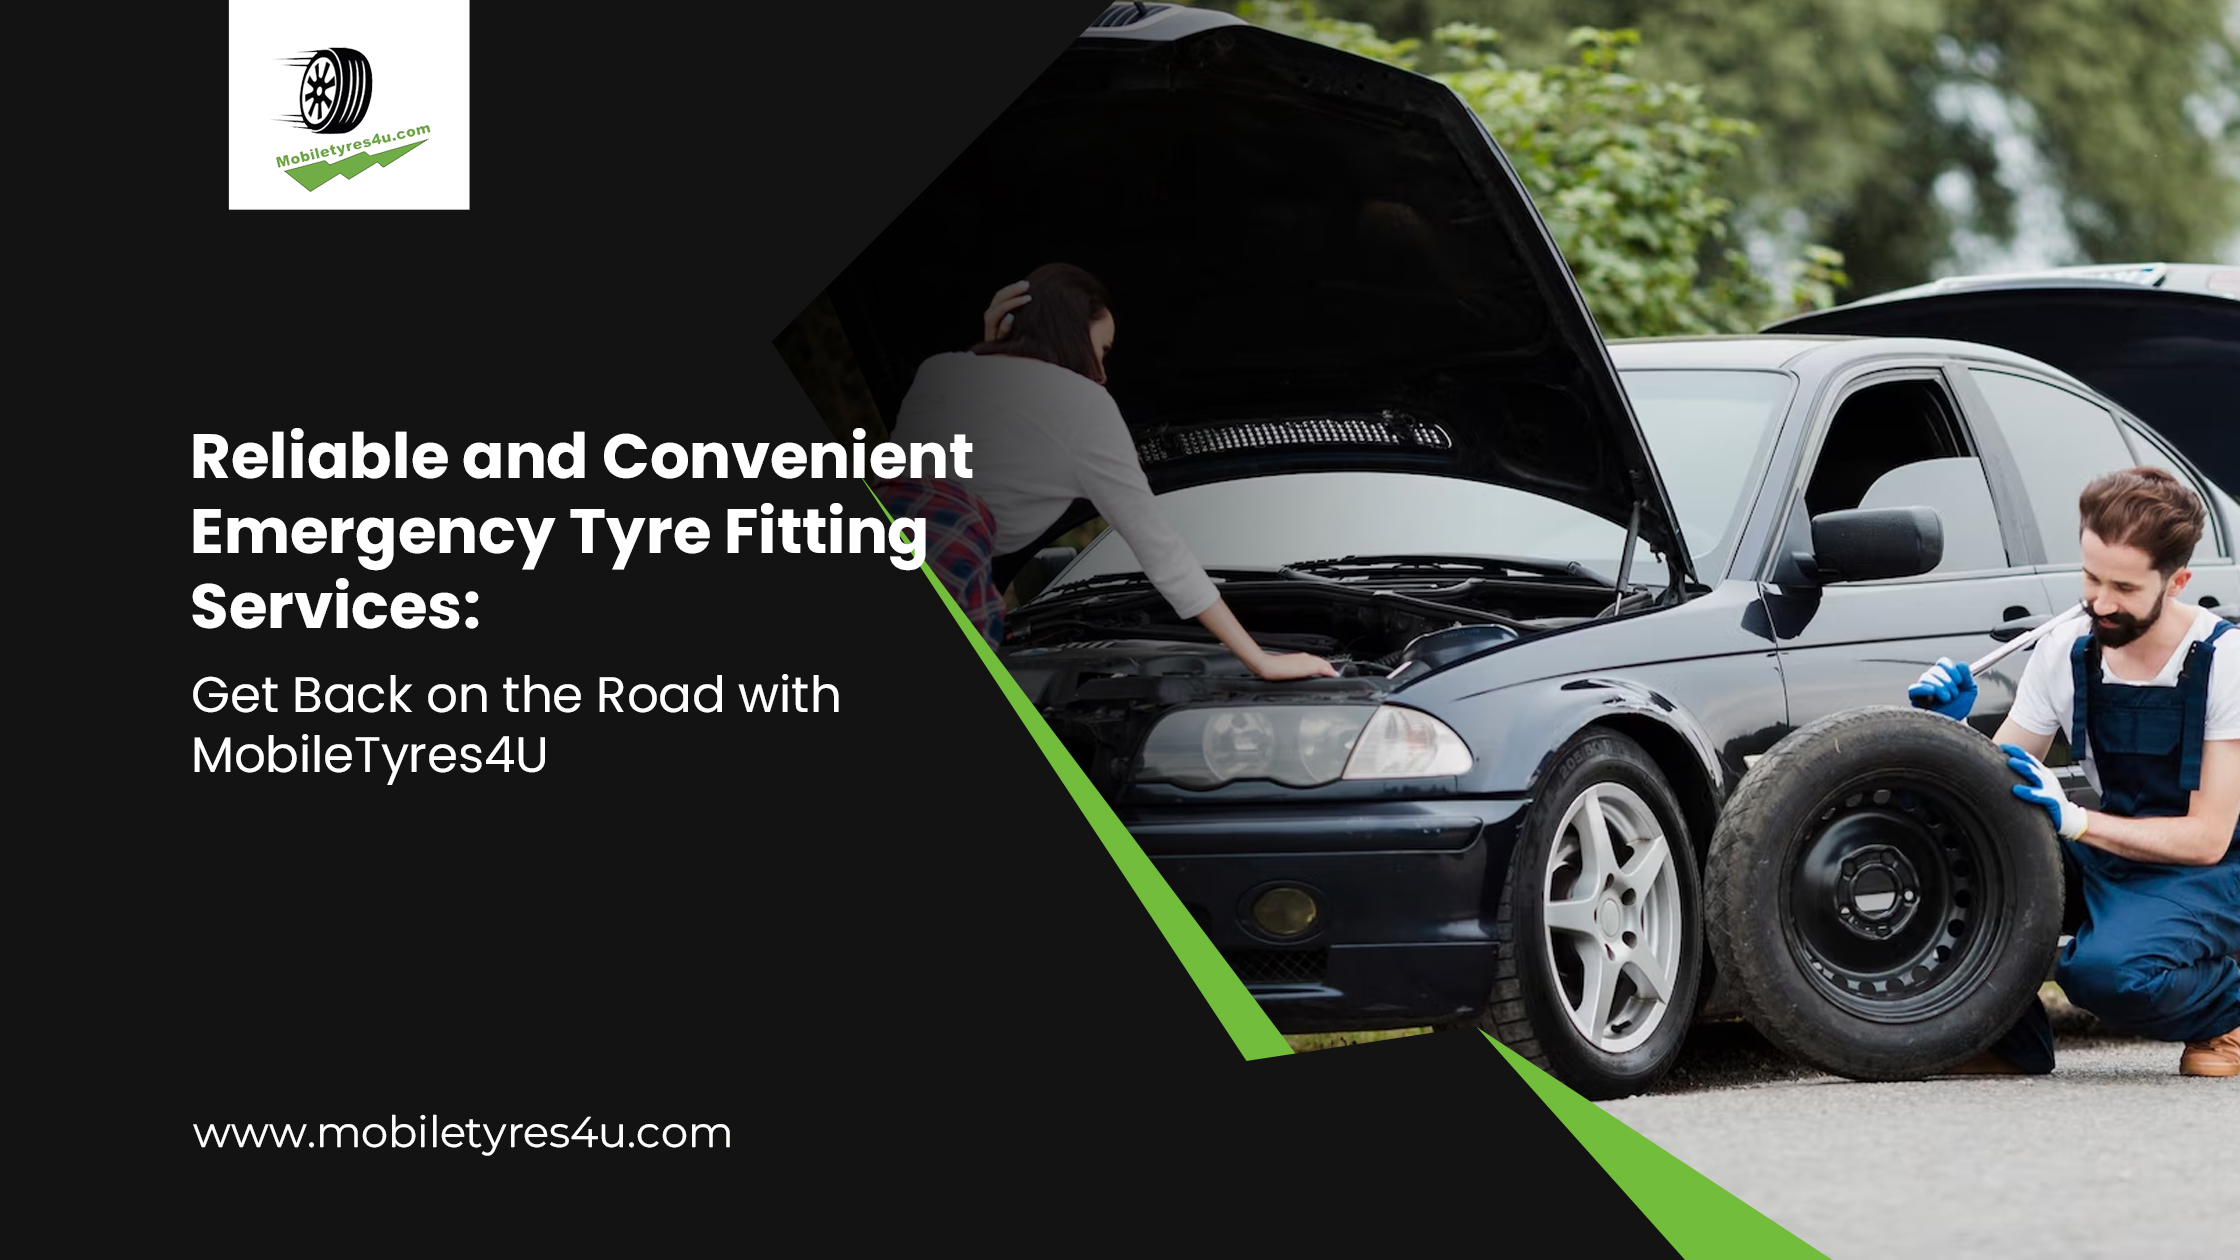 Blog_Convenient and Reliable Emergency Tyre Fitting Services with MobileTyres4U